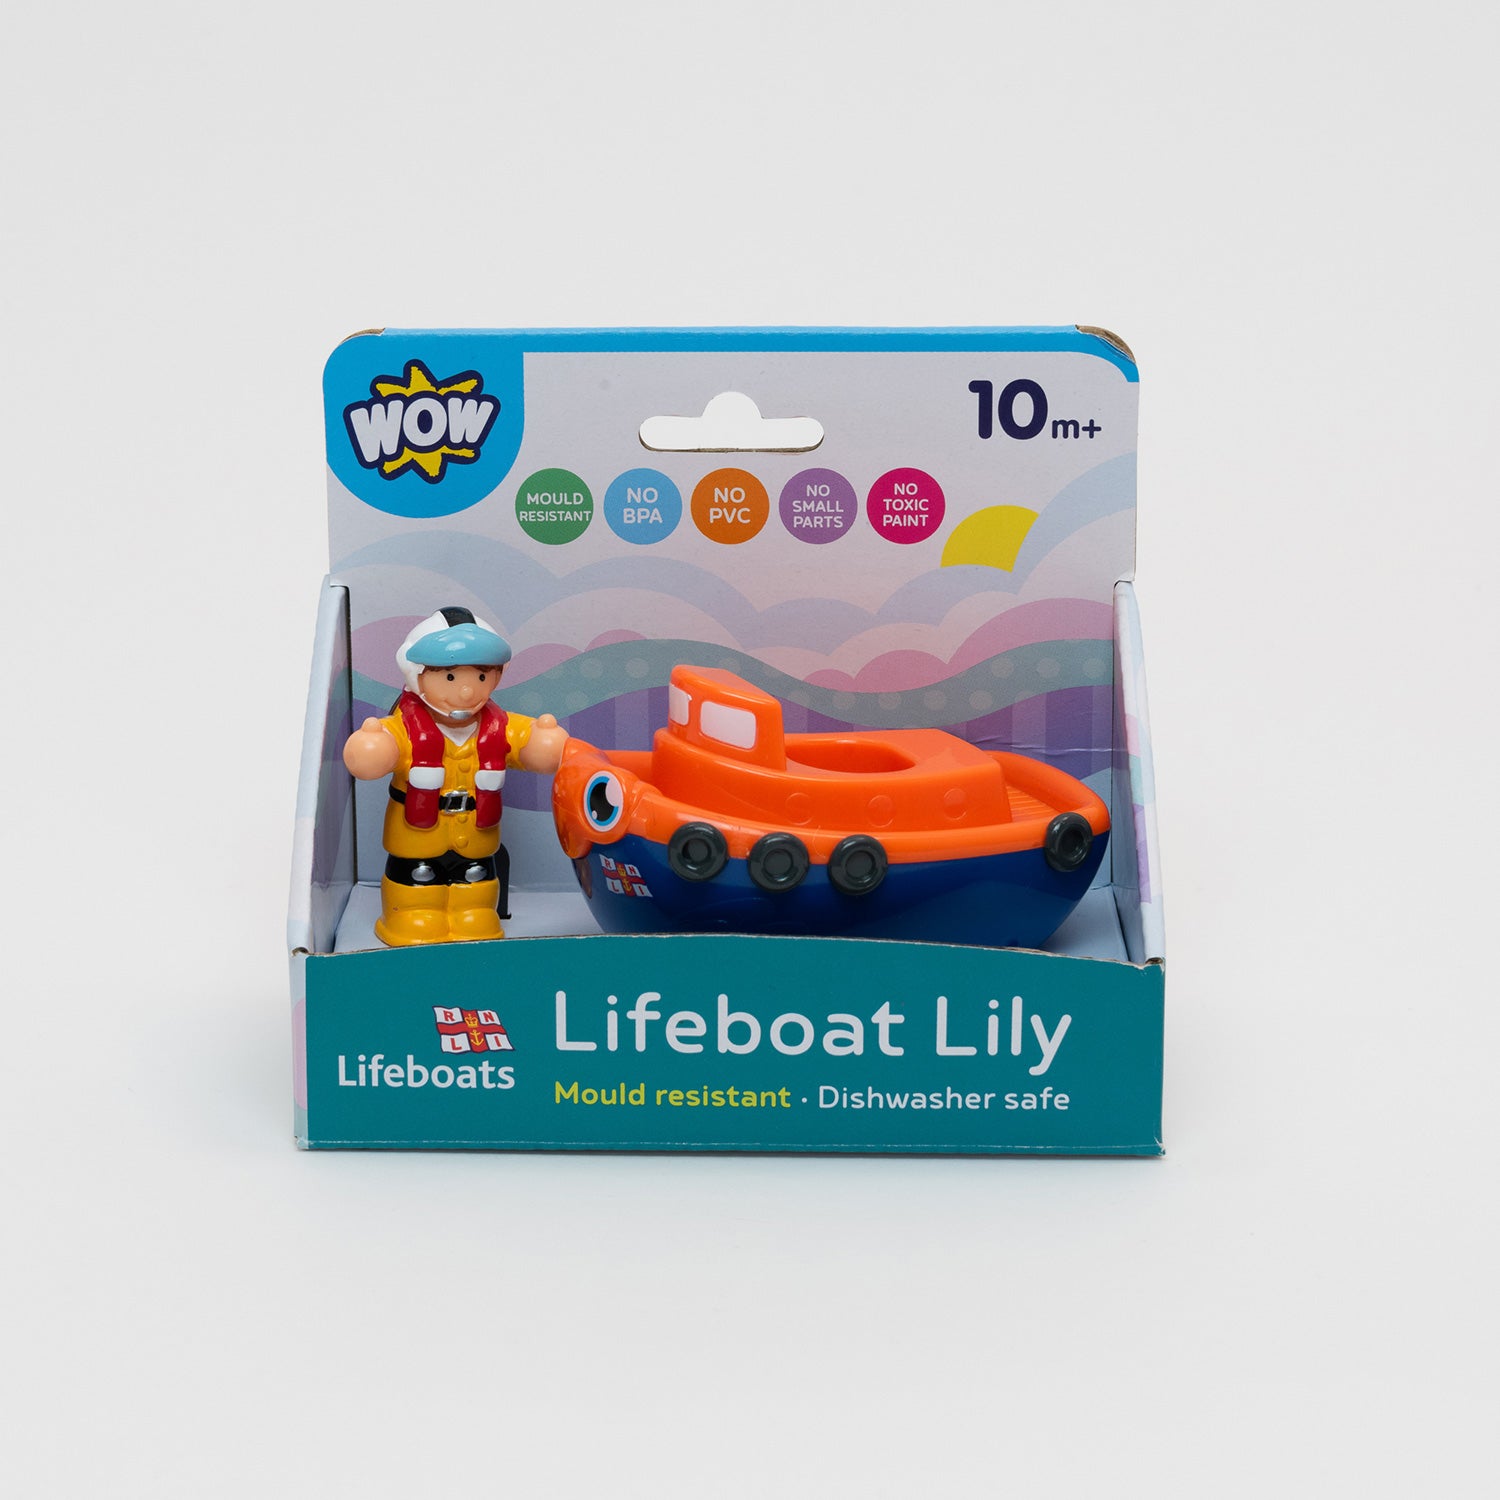 RNLI Lifeboat Lily Bath Toy.  Orange and Blue cartoon lifeboat toy with detachable RNLI team member Lily in her yellow waterproofs and helmet in carboard packaging.